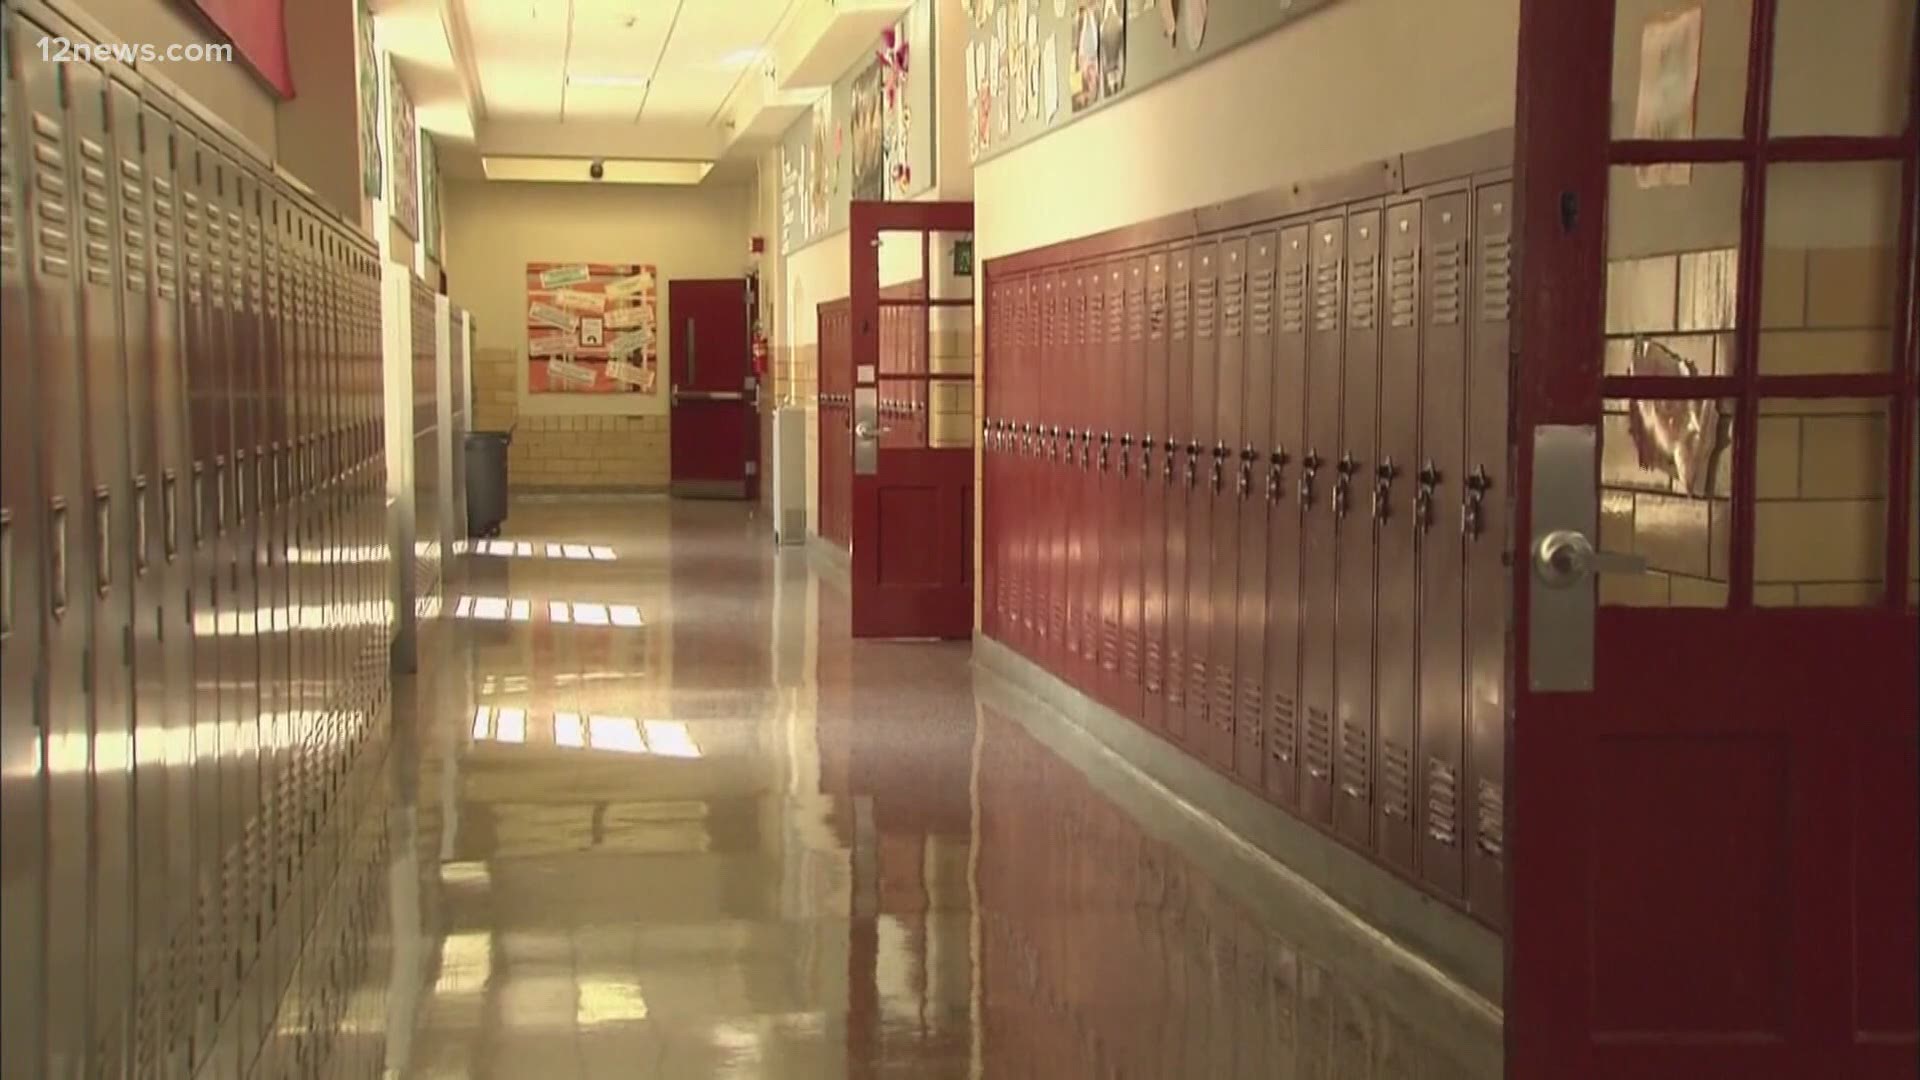 In the midst of protests and calls for change, Tempe Union High School District is looking at replacing school resource officers with social workers.